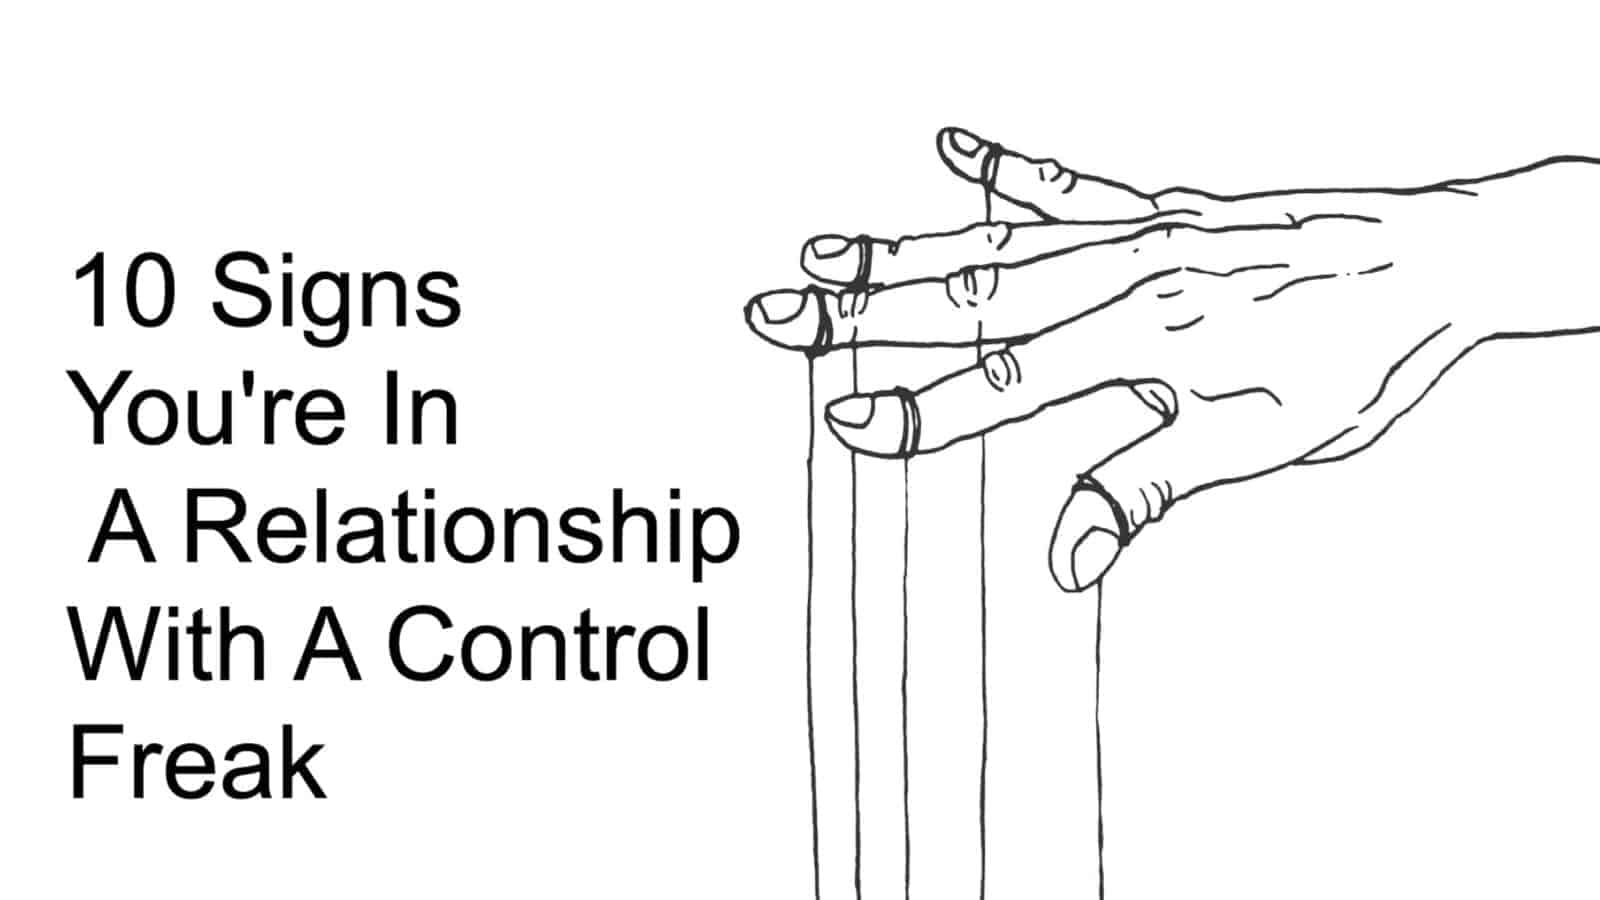 10 Signs You’re In A Relationship With A Control Freak